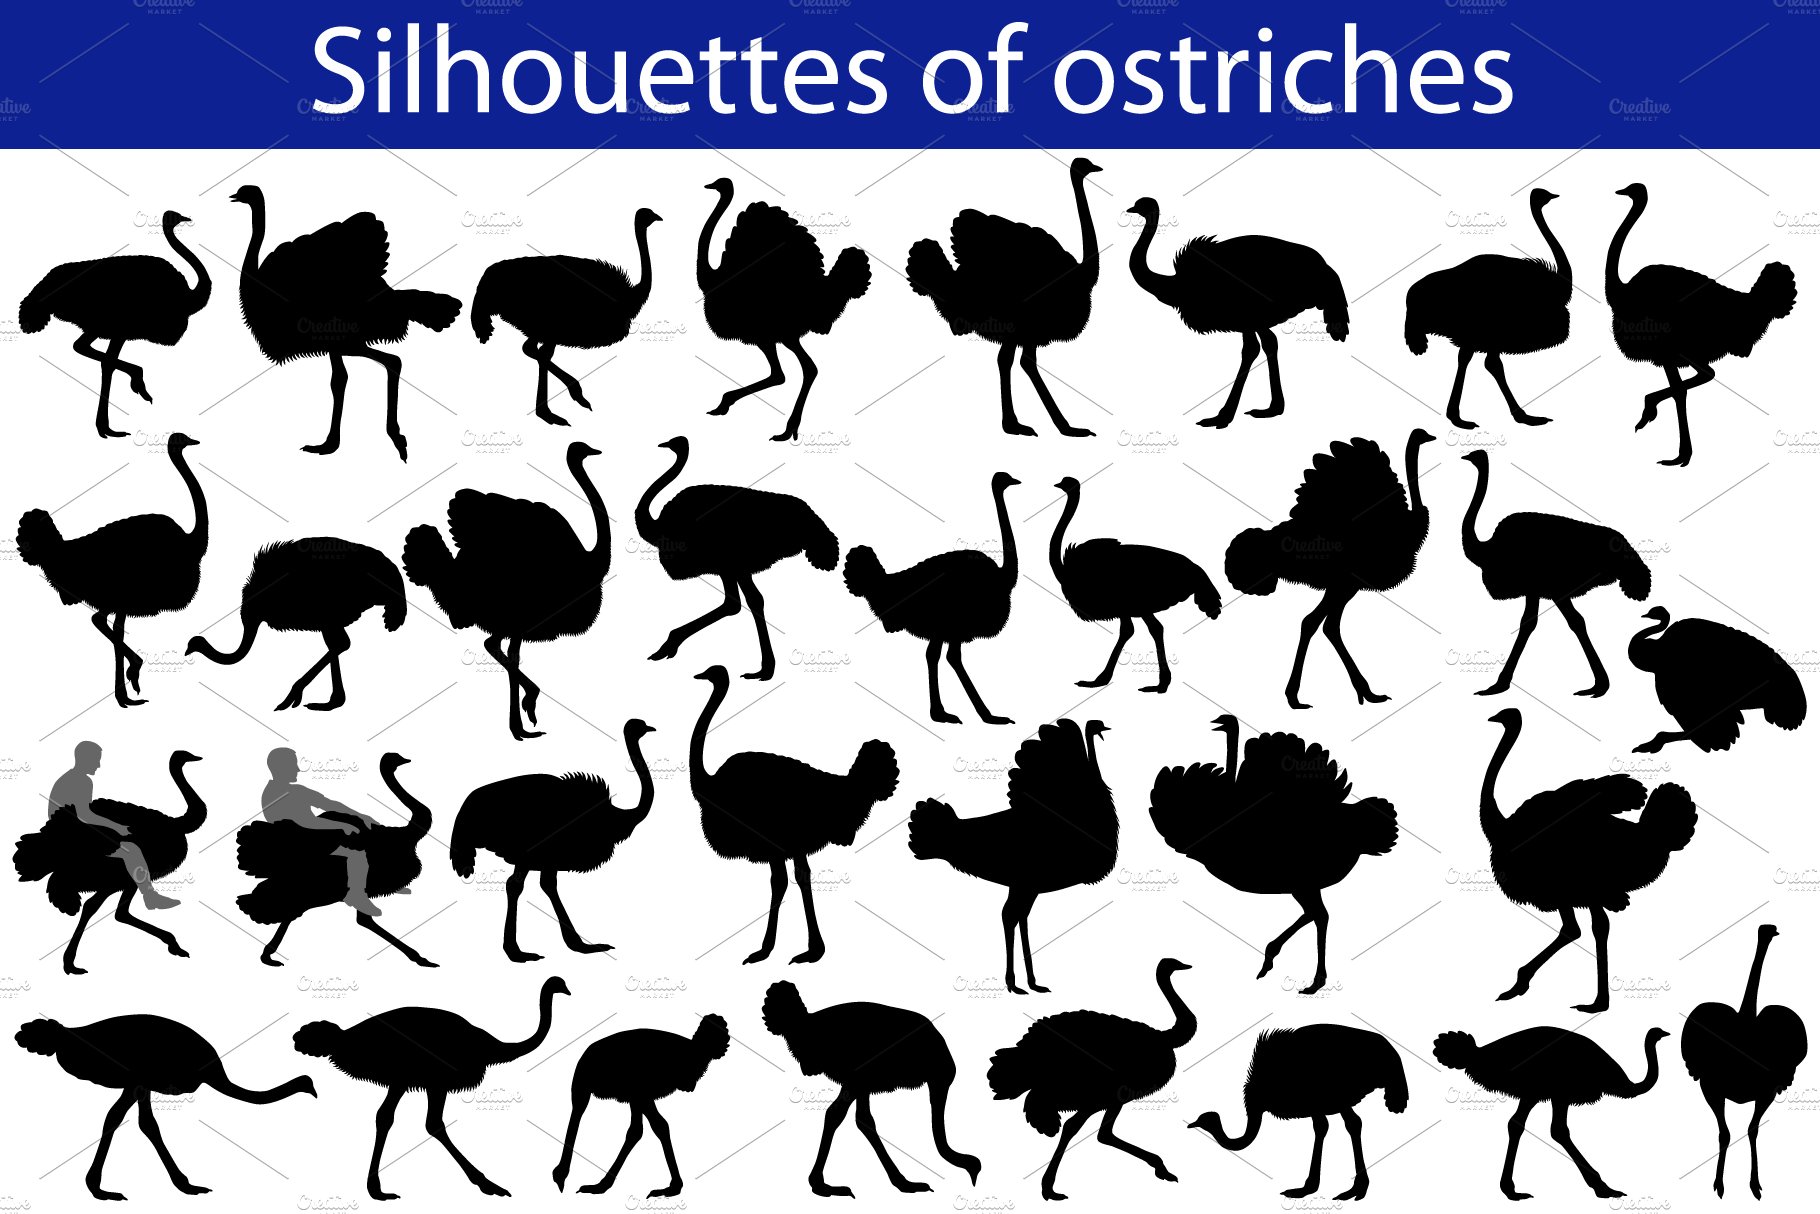 Silhouette of ostrich cover image.